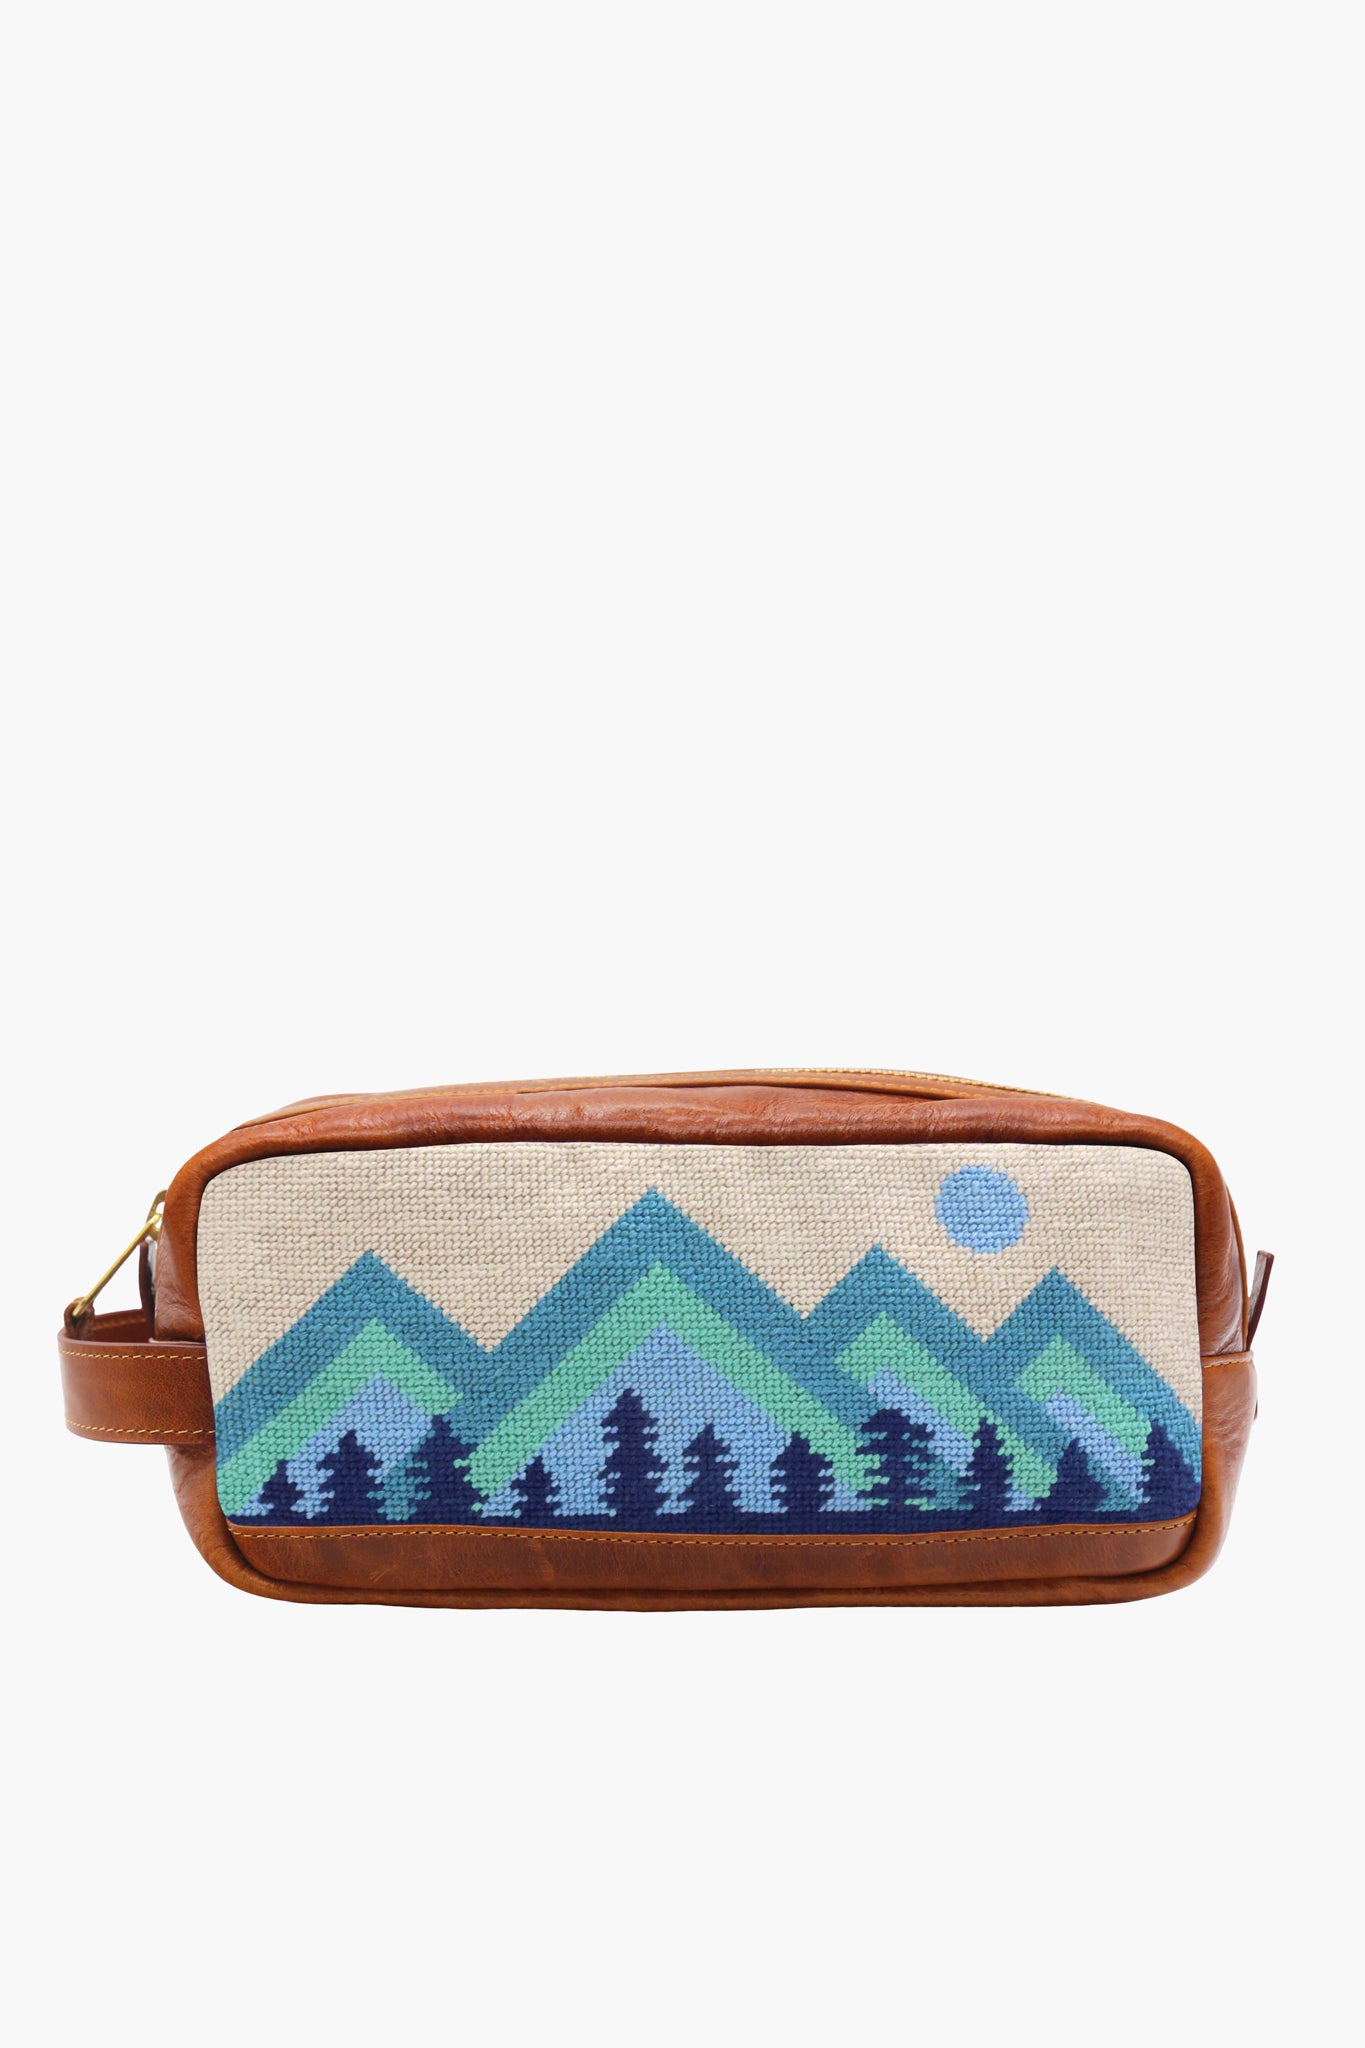 Alpine Needlepoint Toiletry Bag Smathers and Branson